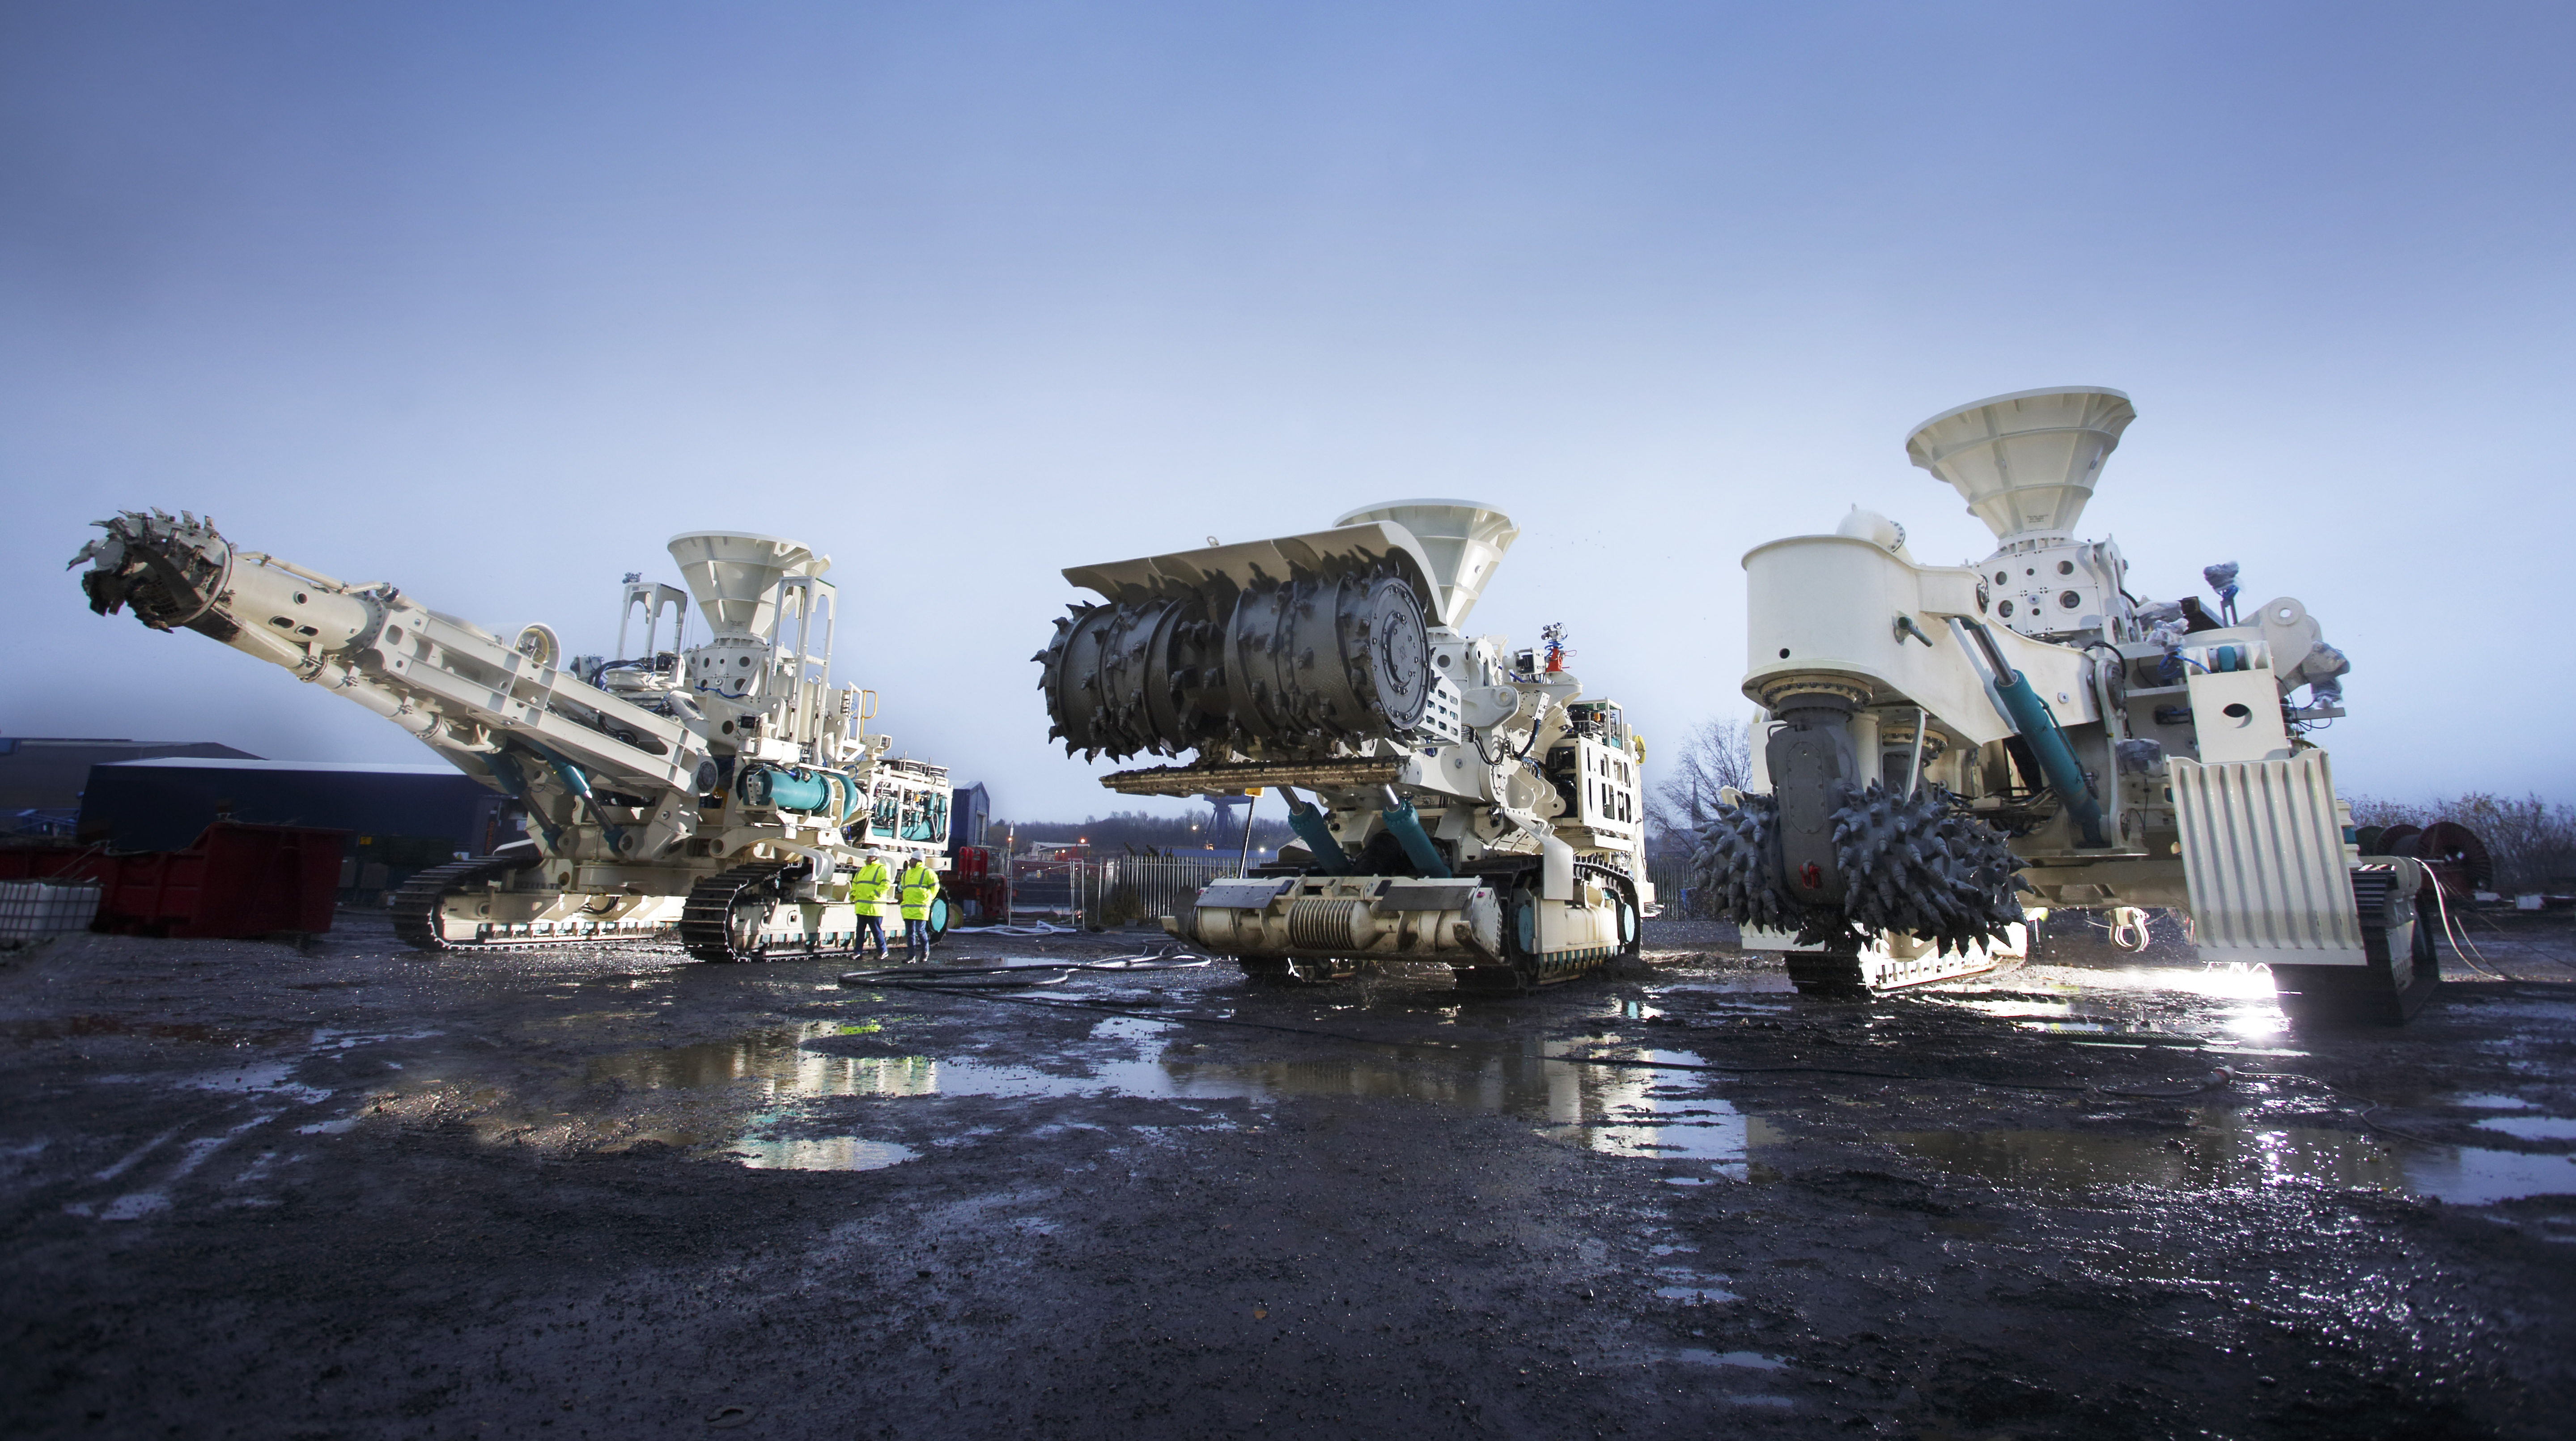 Deep seabed mining machines manufactured by Nautilus Minerals (Image: Nautilus Minerals)